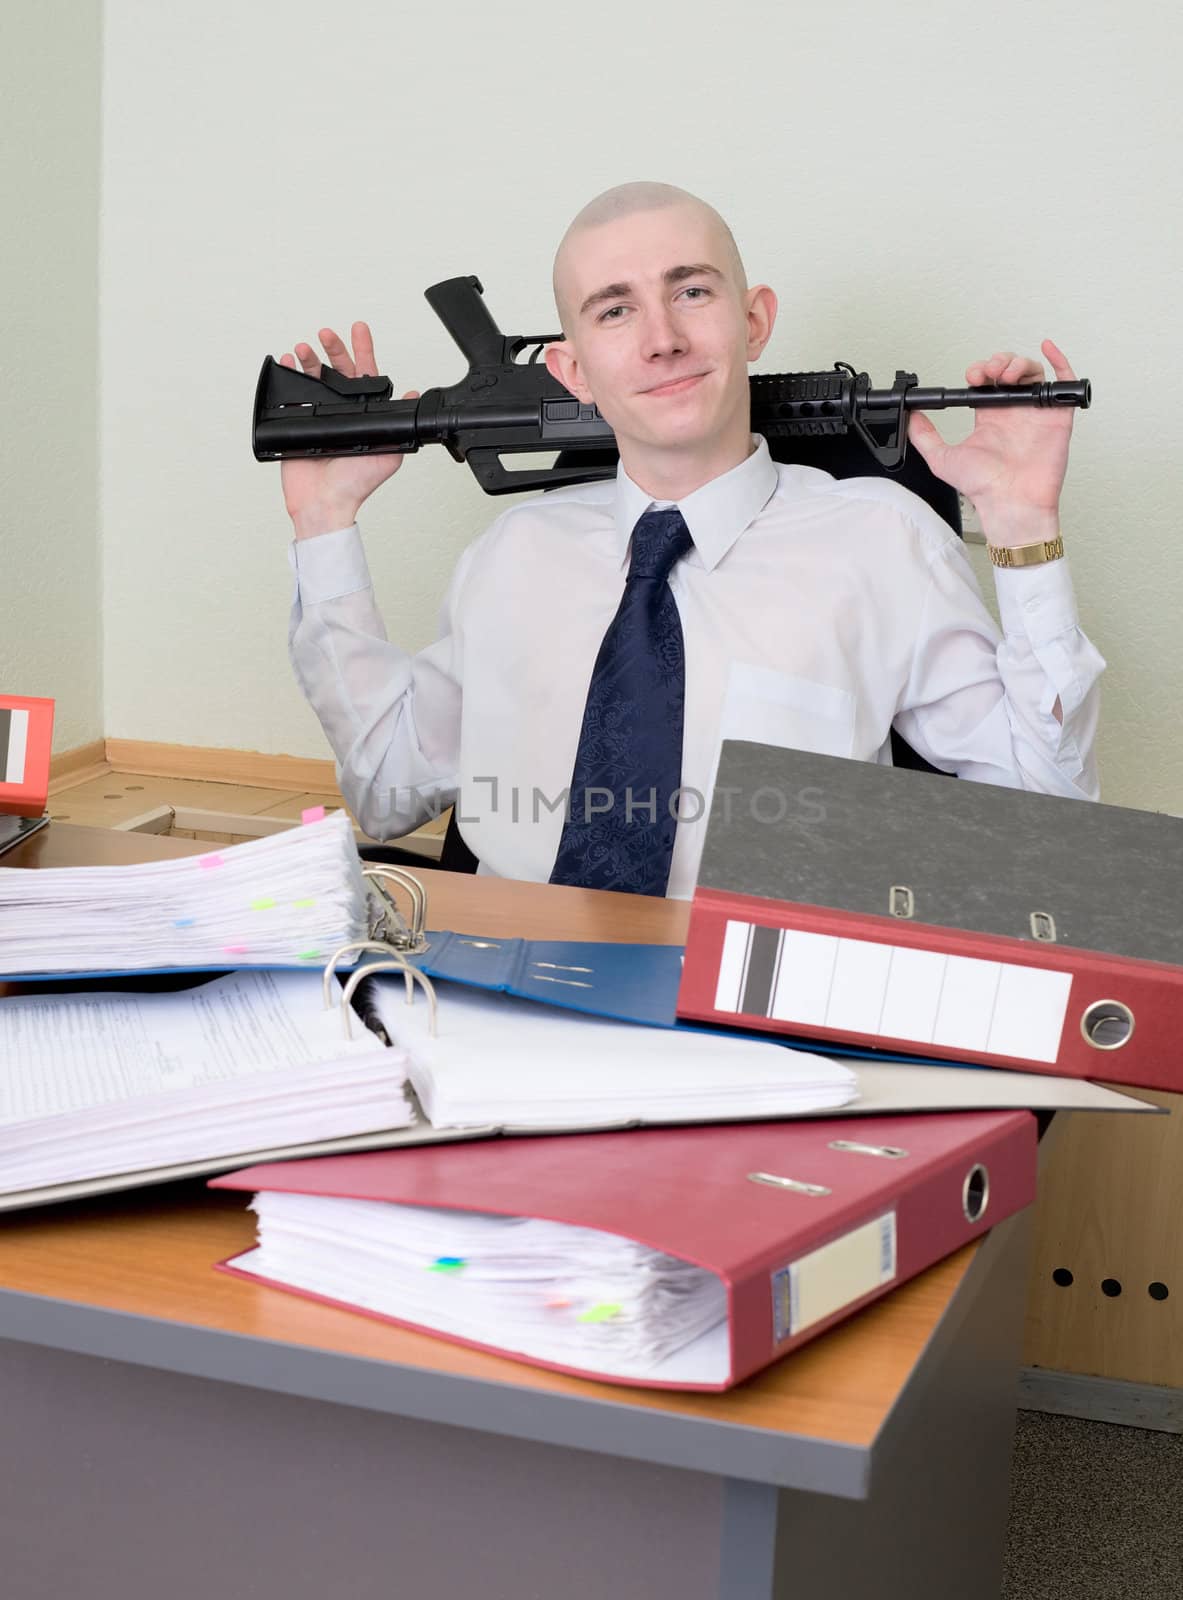 The self-satisfied worker of office armed with a rifle